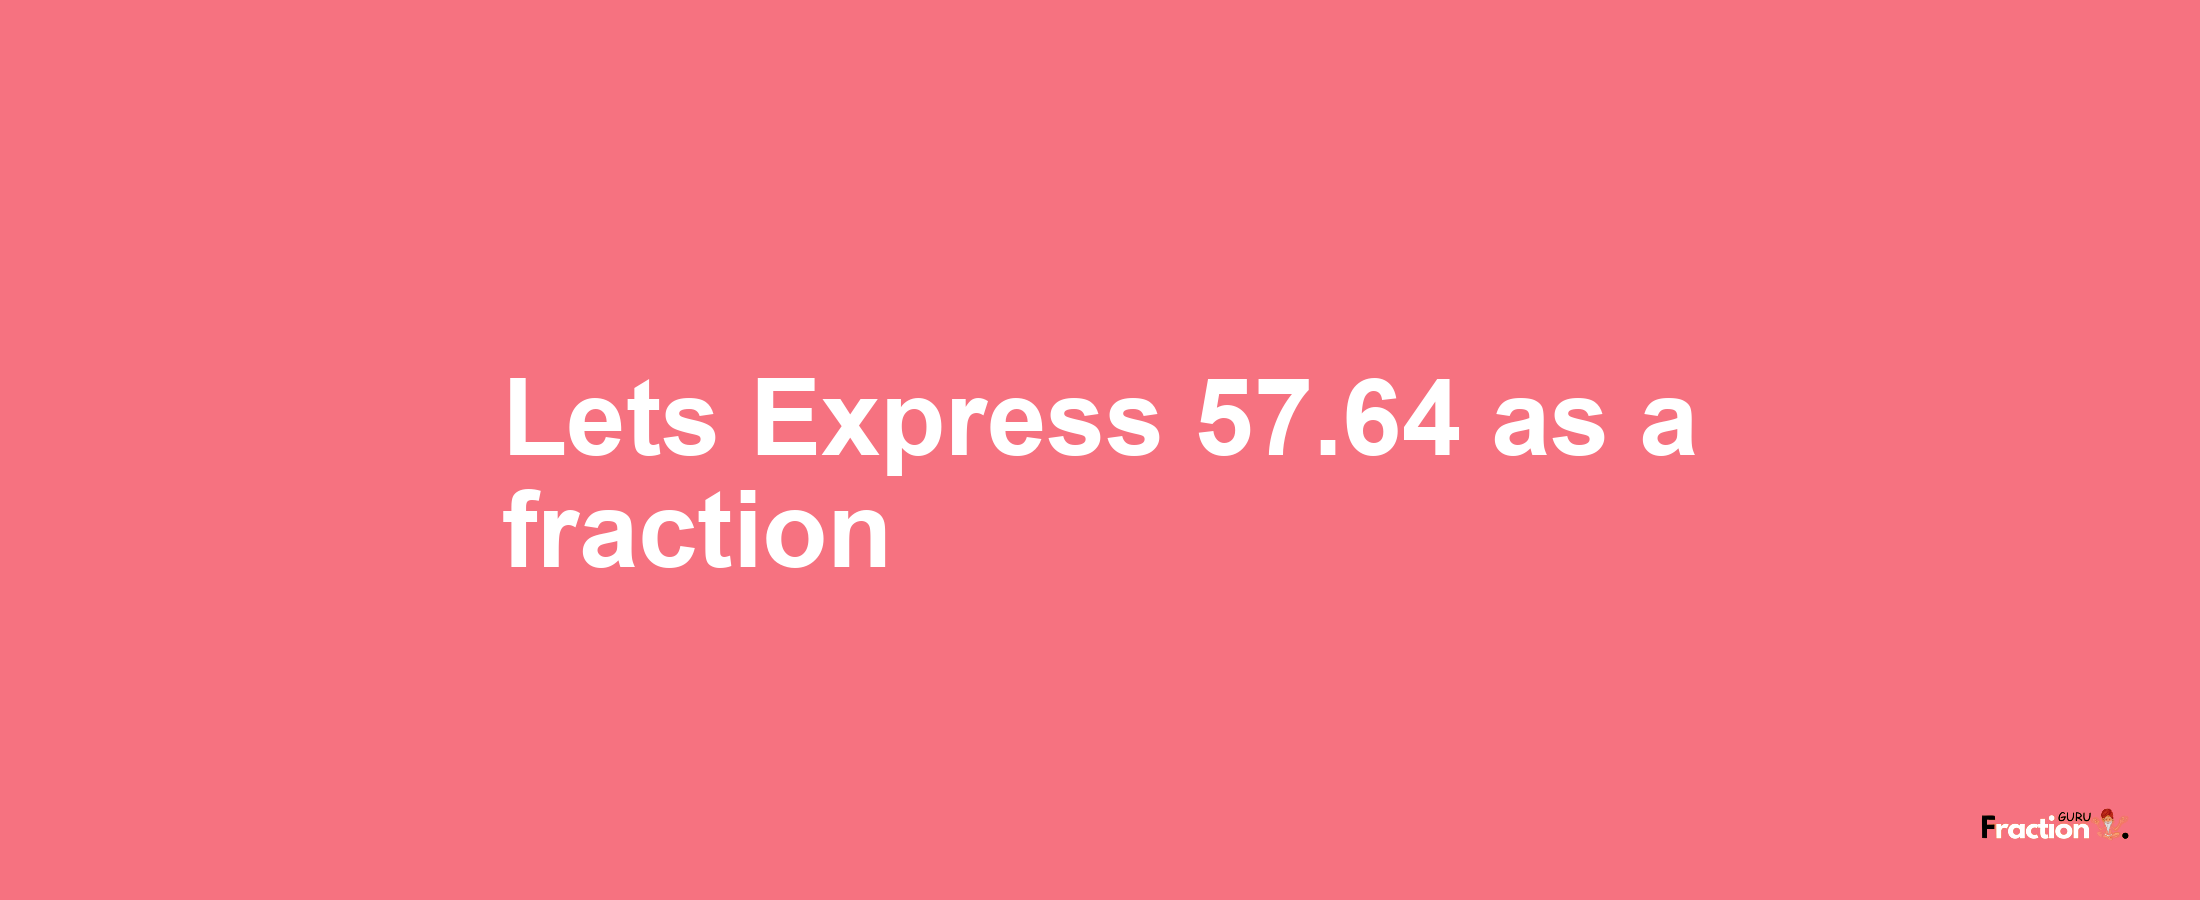 Lets Express 57.64 as afraction